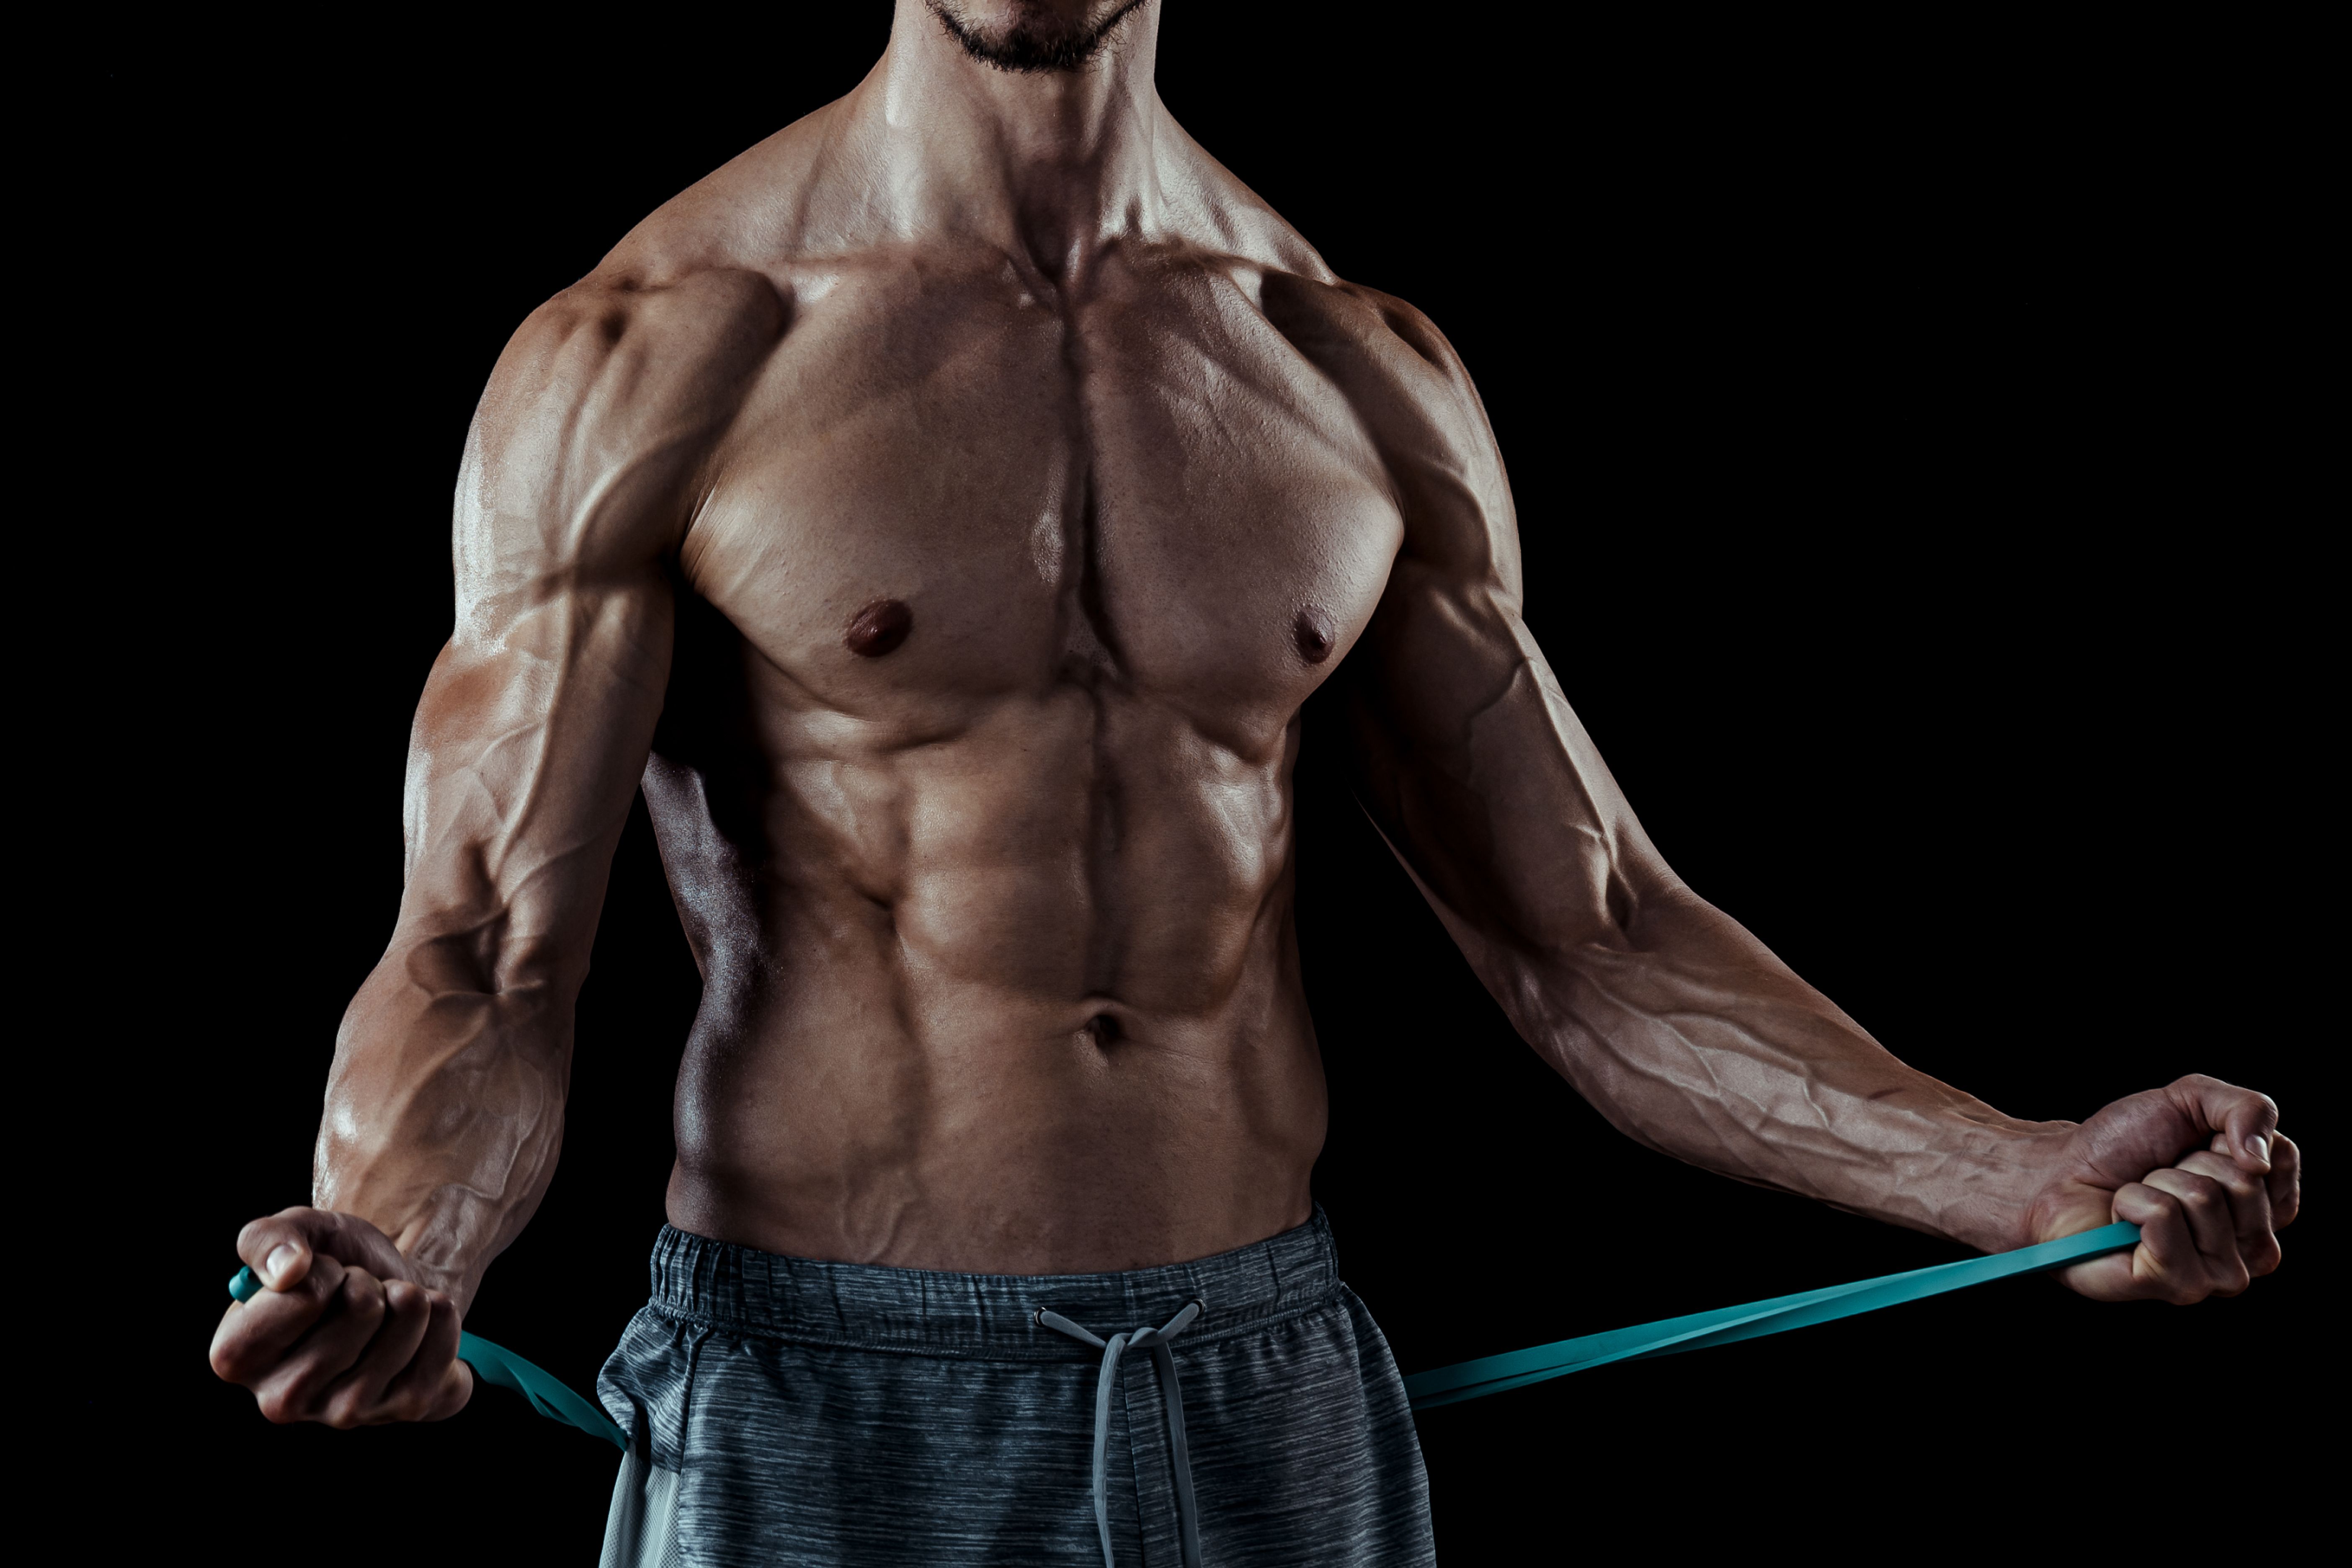 5 Exercises That Can Help Build a Big, Strong Lower Chest